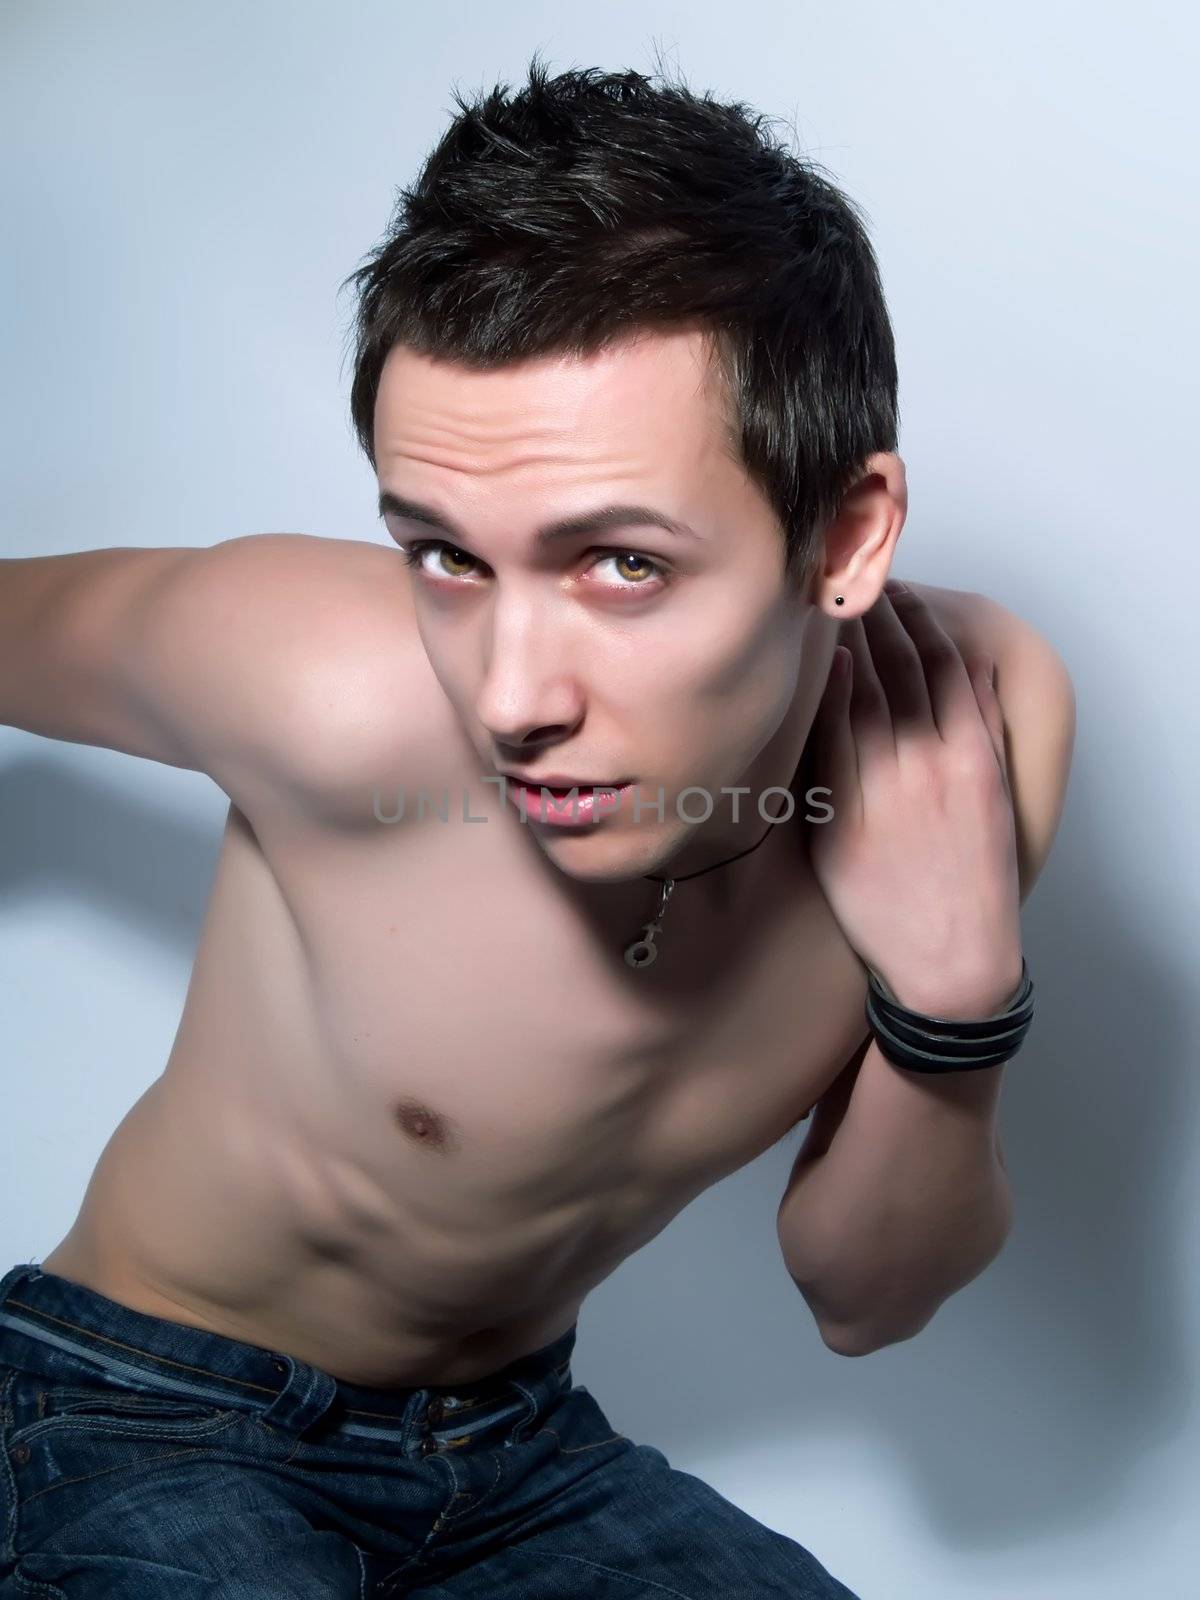 Attractive young man by henrischmit